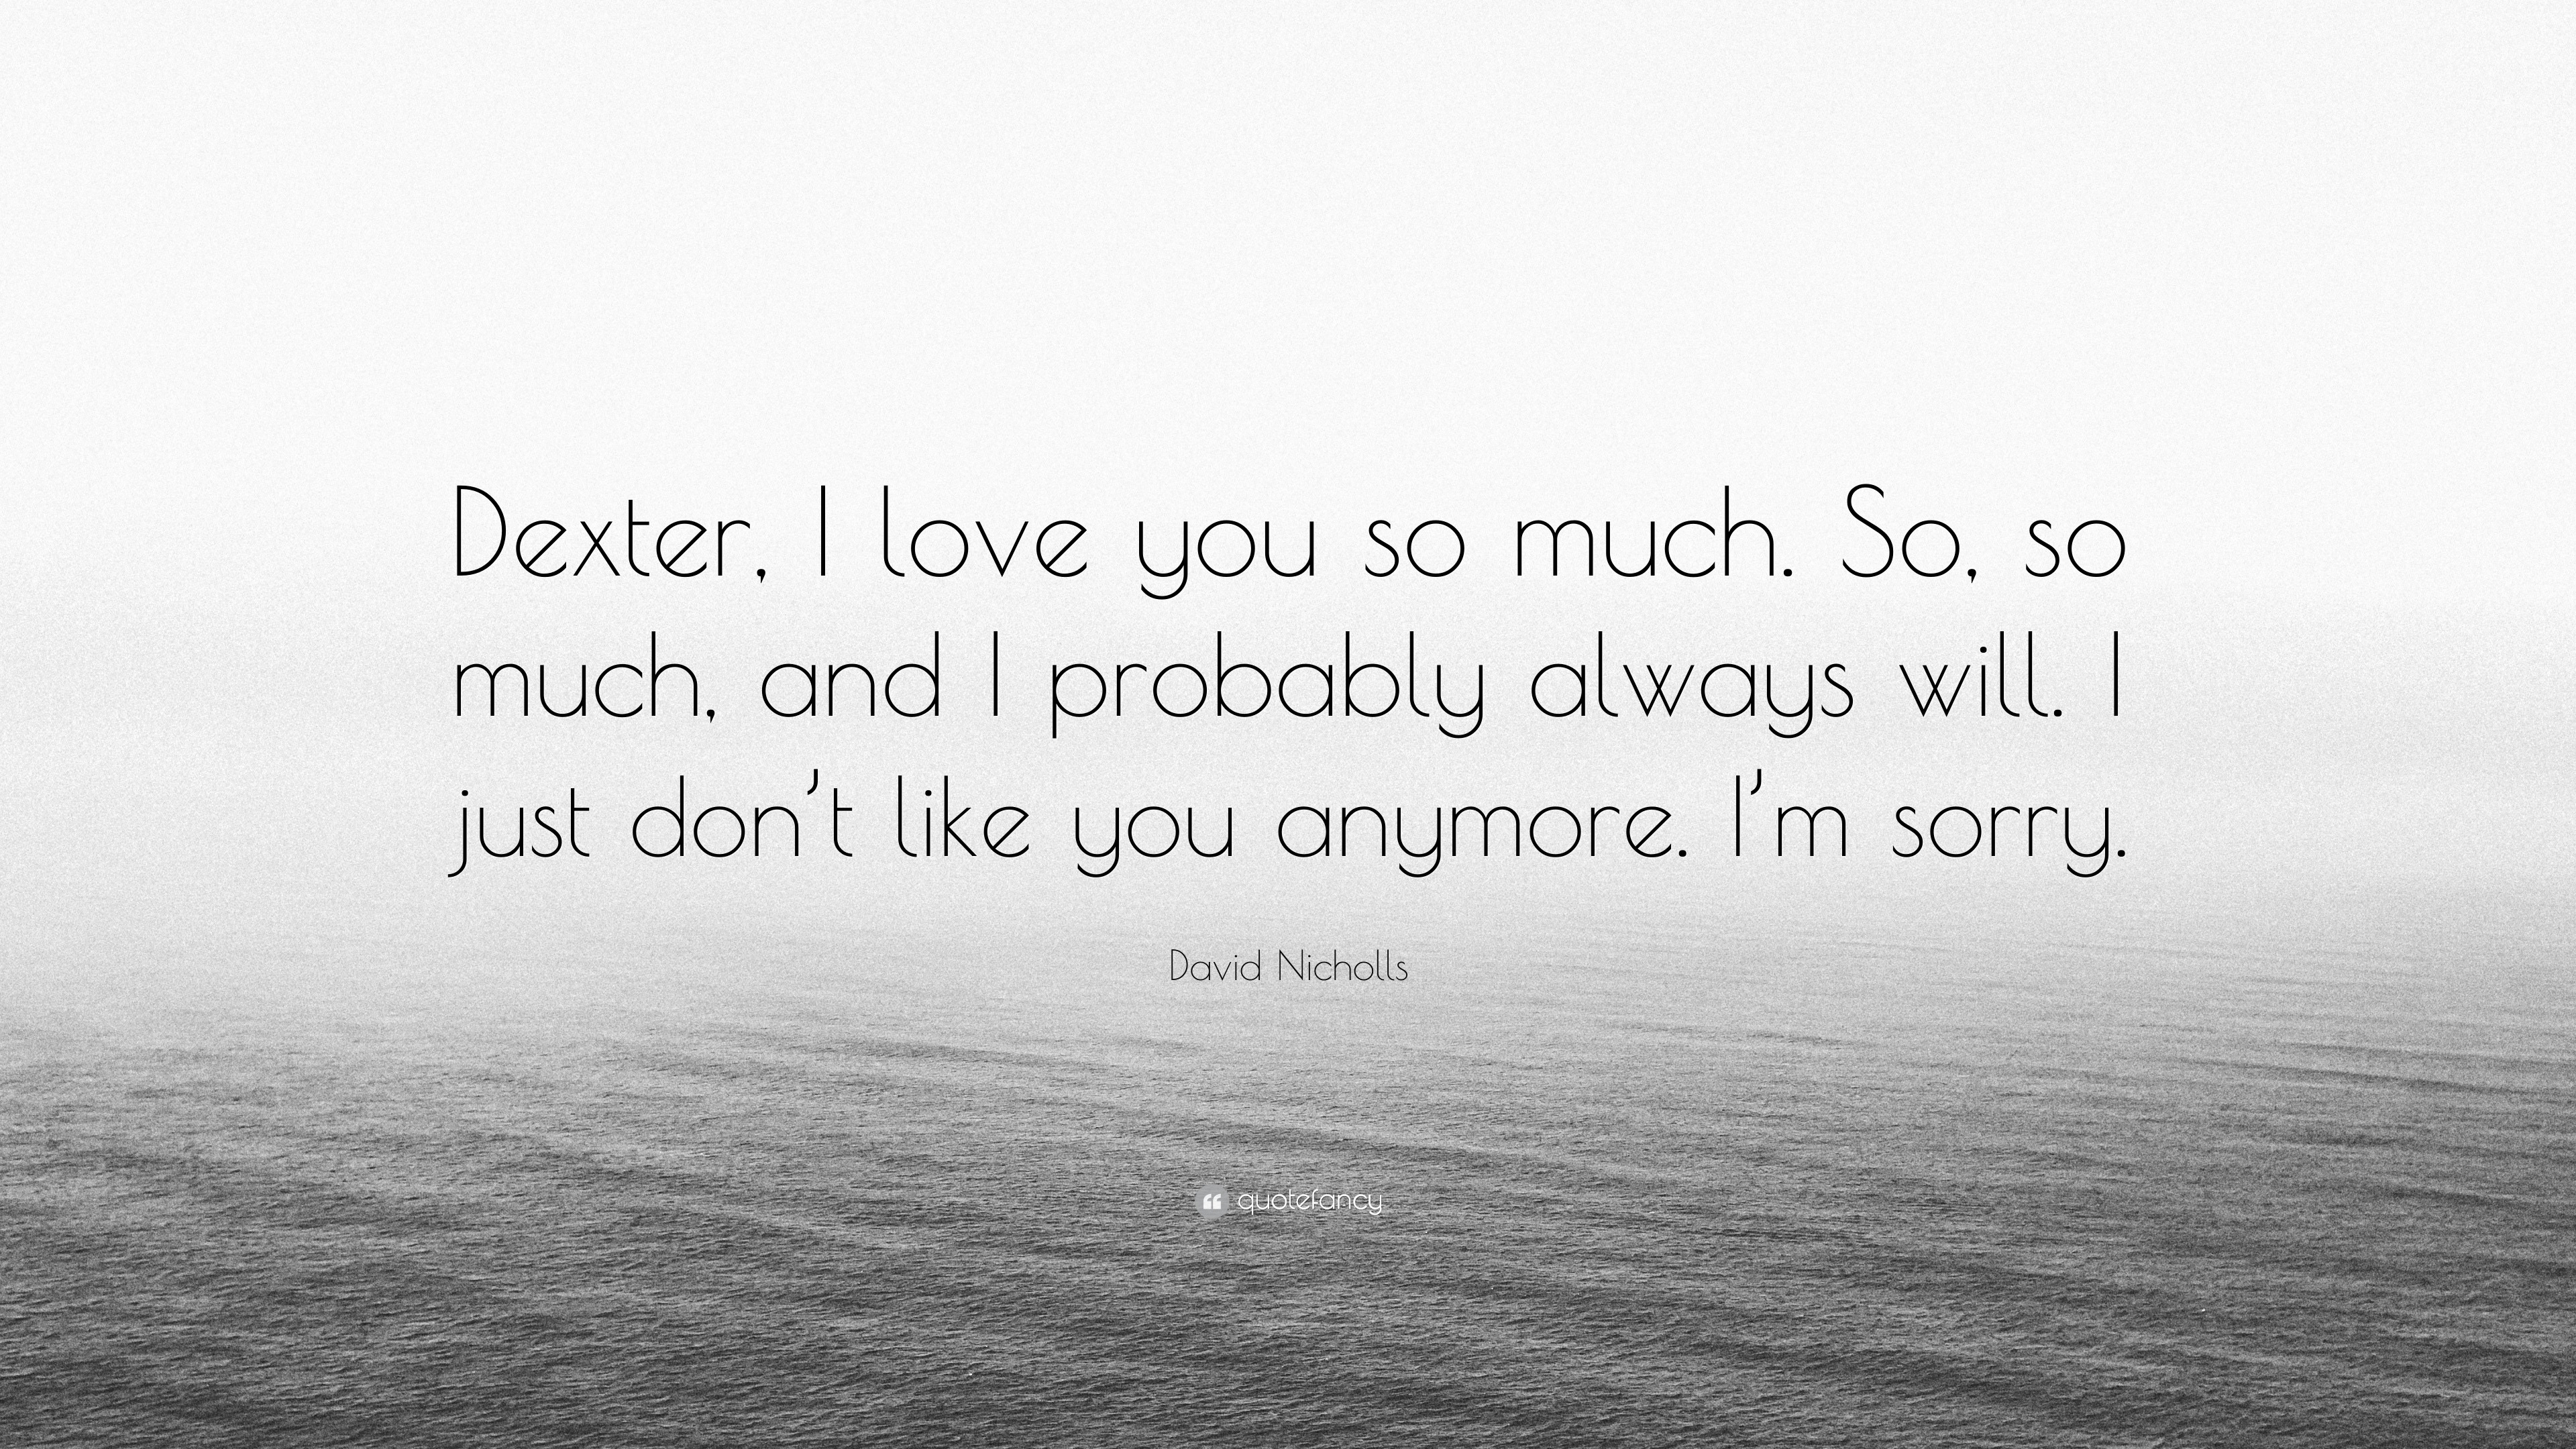 David Nicholls Quote Dexter I Love You So Much So So Much And I Probably Always